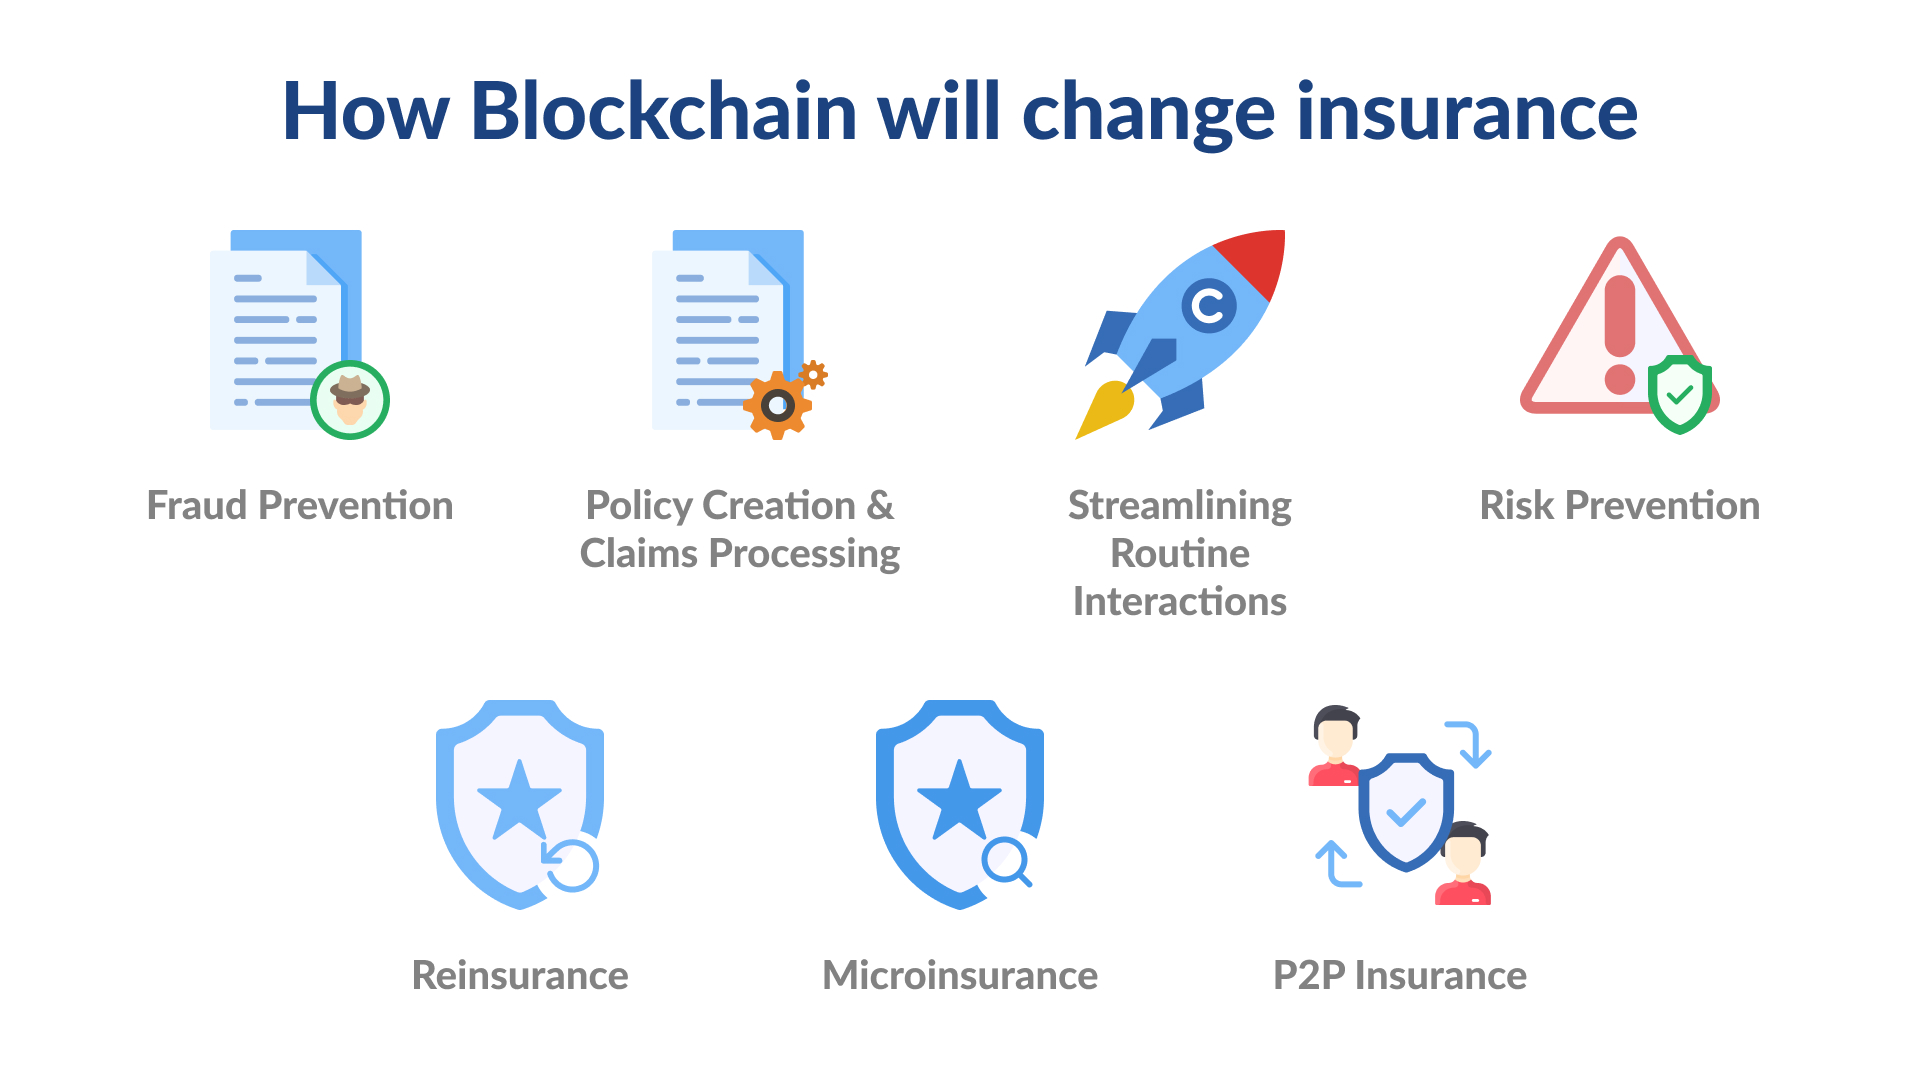 Blockchain applications in the insurance industry